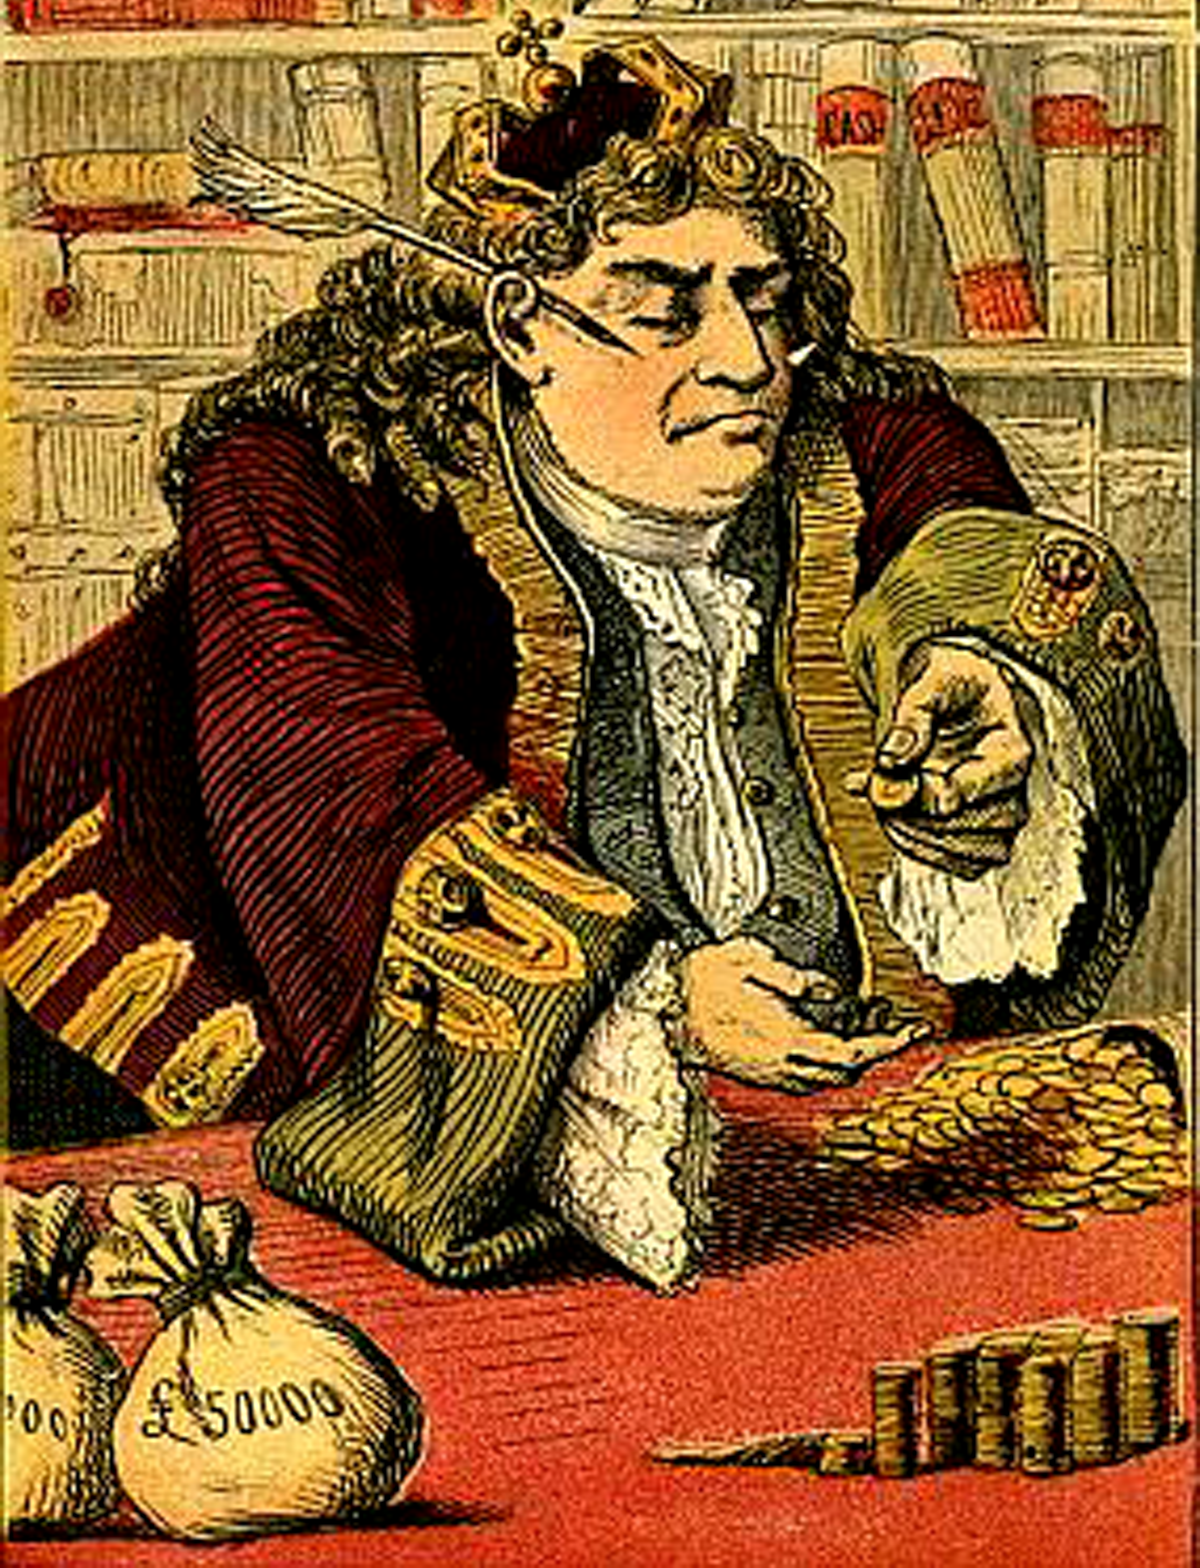 Illustration of king counting his money from Sing a Song of Sixpence